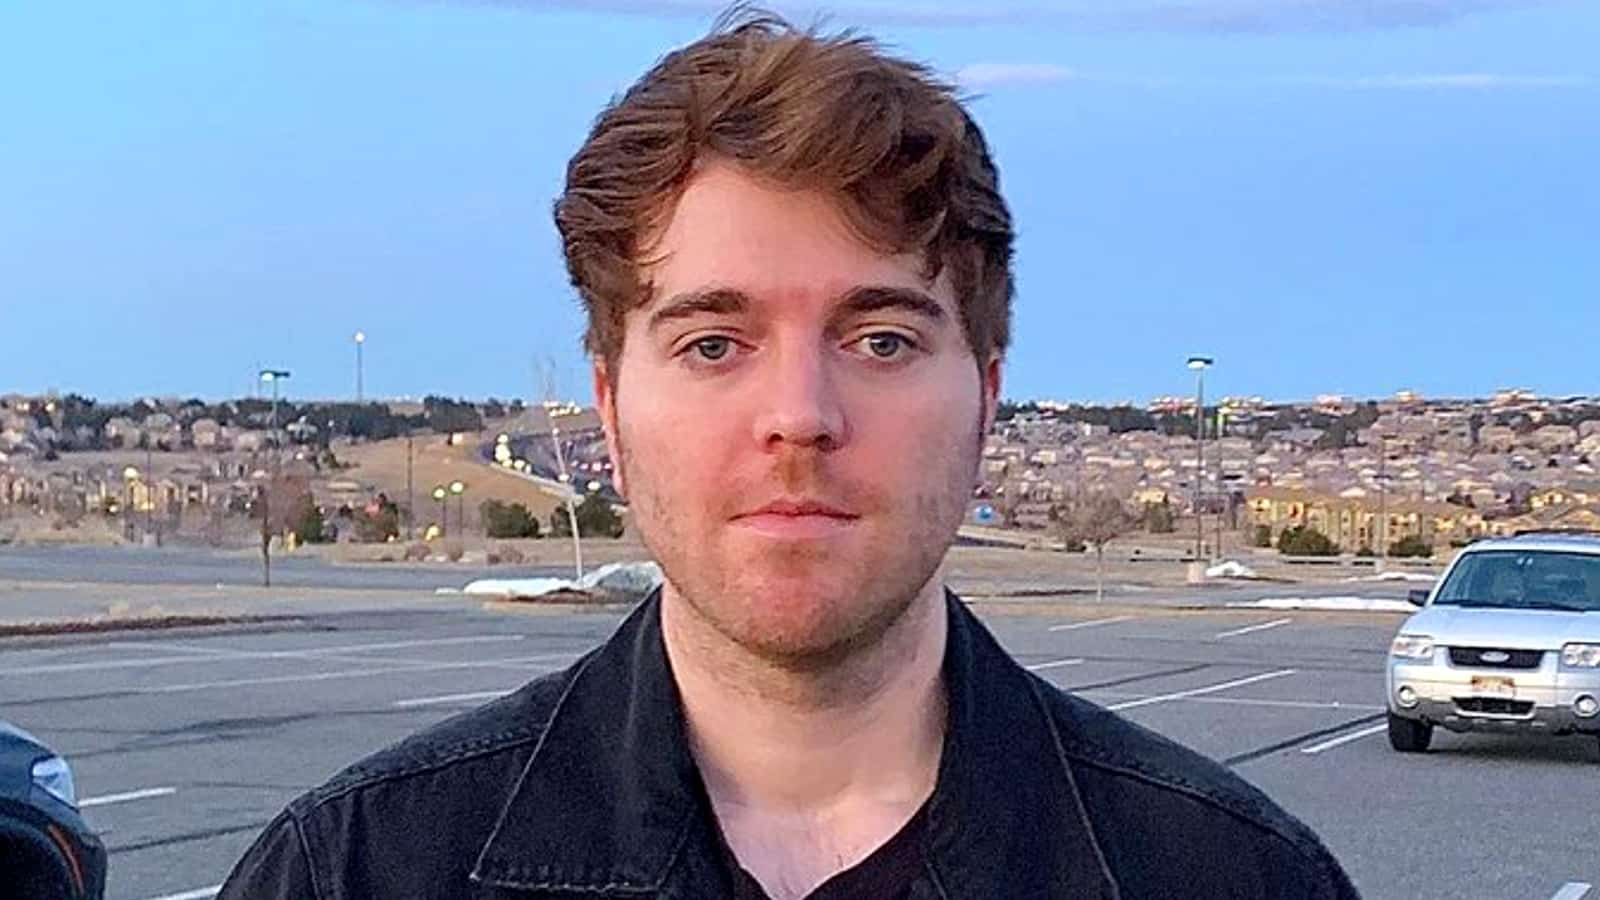 Shane Dawson posing for a picture